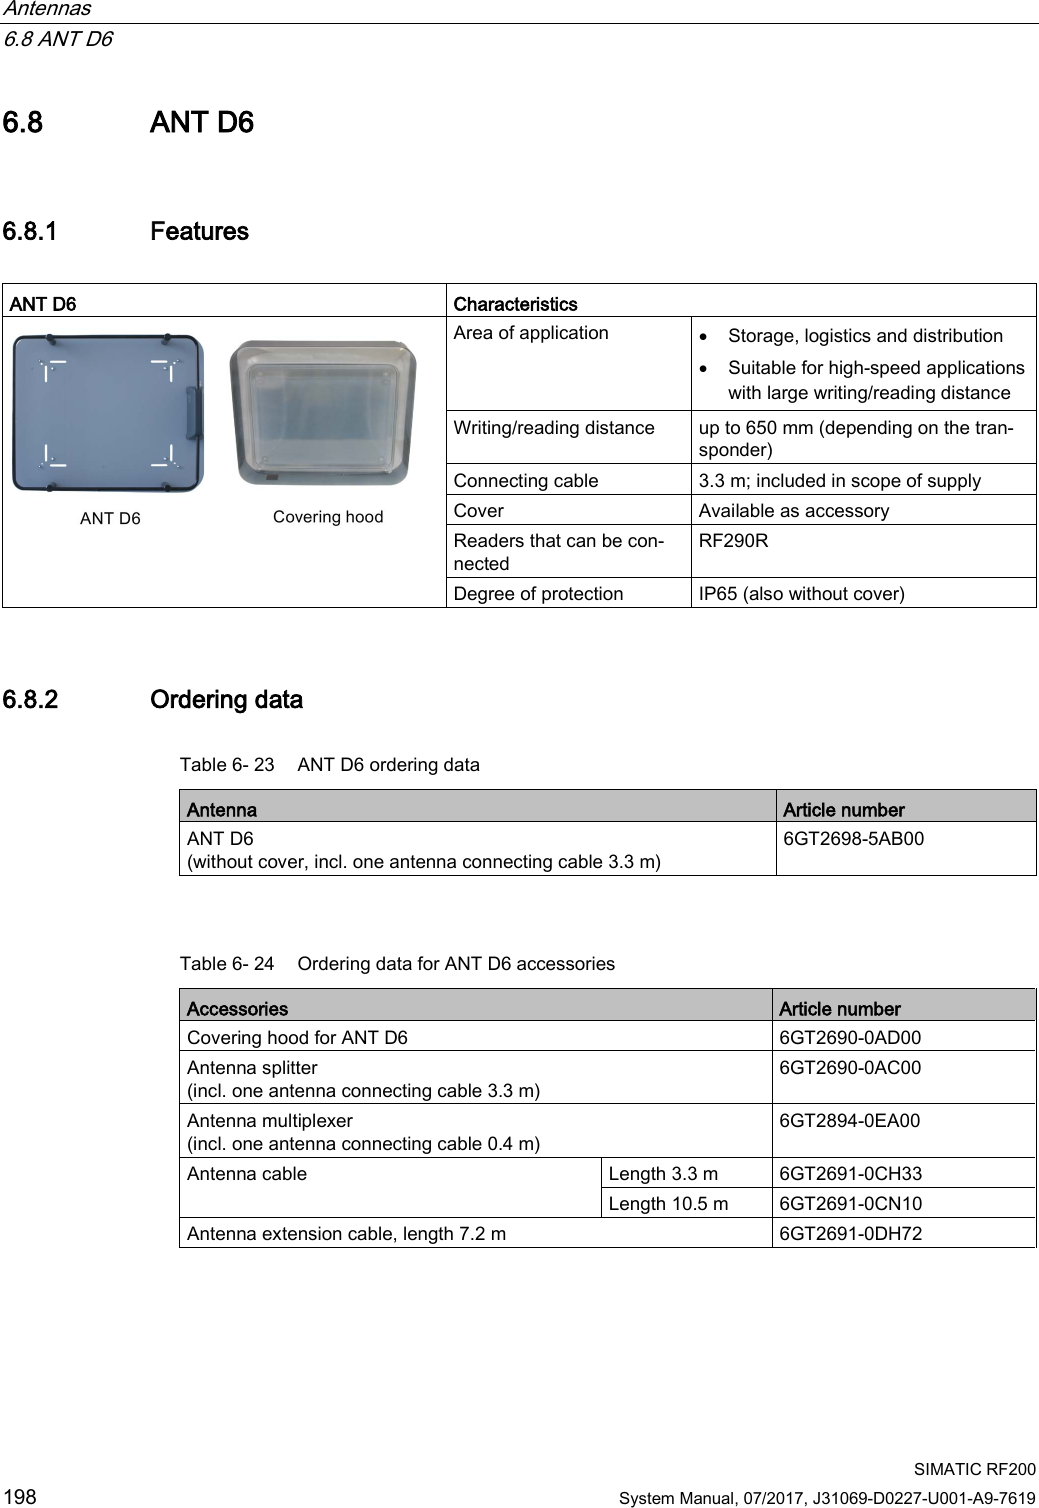 Antennas   6.8 ANT D6  SIMATIC RF200 198 System Manual, 07/2017, J31069-D0227-U001-A9-7619 6.8 ANT D6 6.8.1 Features  ANT D6 Characteristics  Area of application • Storage, logistics and distribution • Suitable for high-speed applications with large writing/reading distance Writing/reading distance up to 650 mm (depending on the tran-sponder) Connecting cable 3.3 m; included in scope of supply Cover Available as accessory Readers that can be con-nected RF290R Degree of protection IP65 (also without cover) 6.8.2 Ordering data Table 6- 23 ANT D6 ordering data Antenna Article number ANT D6 (without cover, incl. one antenna connecting cable 3.3 m) 6GT2698-5AB00   Table 6- 24 Ordering data for ANT D6 accessories Accessories Article number Covering hood for ANT D6 6GT2690-0AD00 Antenna splitter (incl. one antenna connecting cable 3.3 m) 6GT2690-0AC00 Antenna multiplexer (incl. one antenna connecting cable 0.4 m) 6GT2894-0EA00 Antenna cable Length 3.3 m 6GT2691-0CH33 Length 10.5 m 6GT2691-0CN10 Antenna extension cable, length 7.2 m 6GT2691-0DH72 